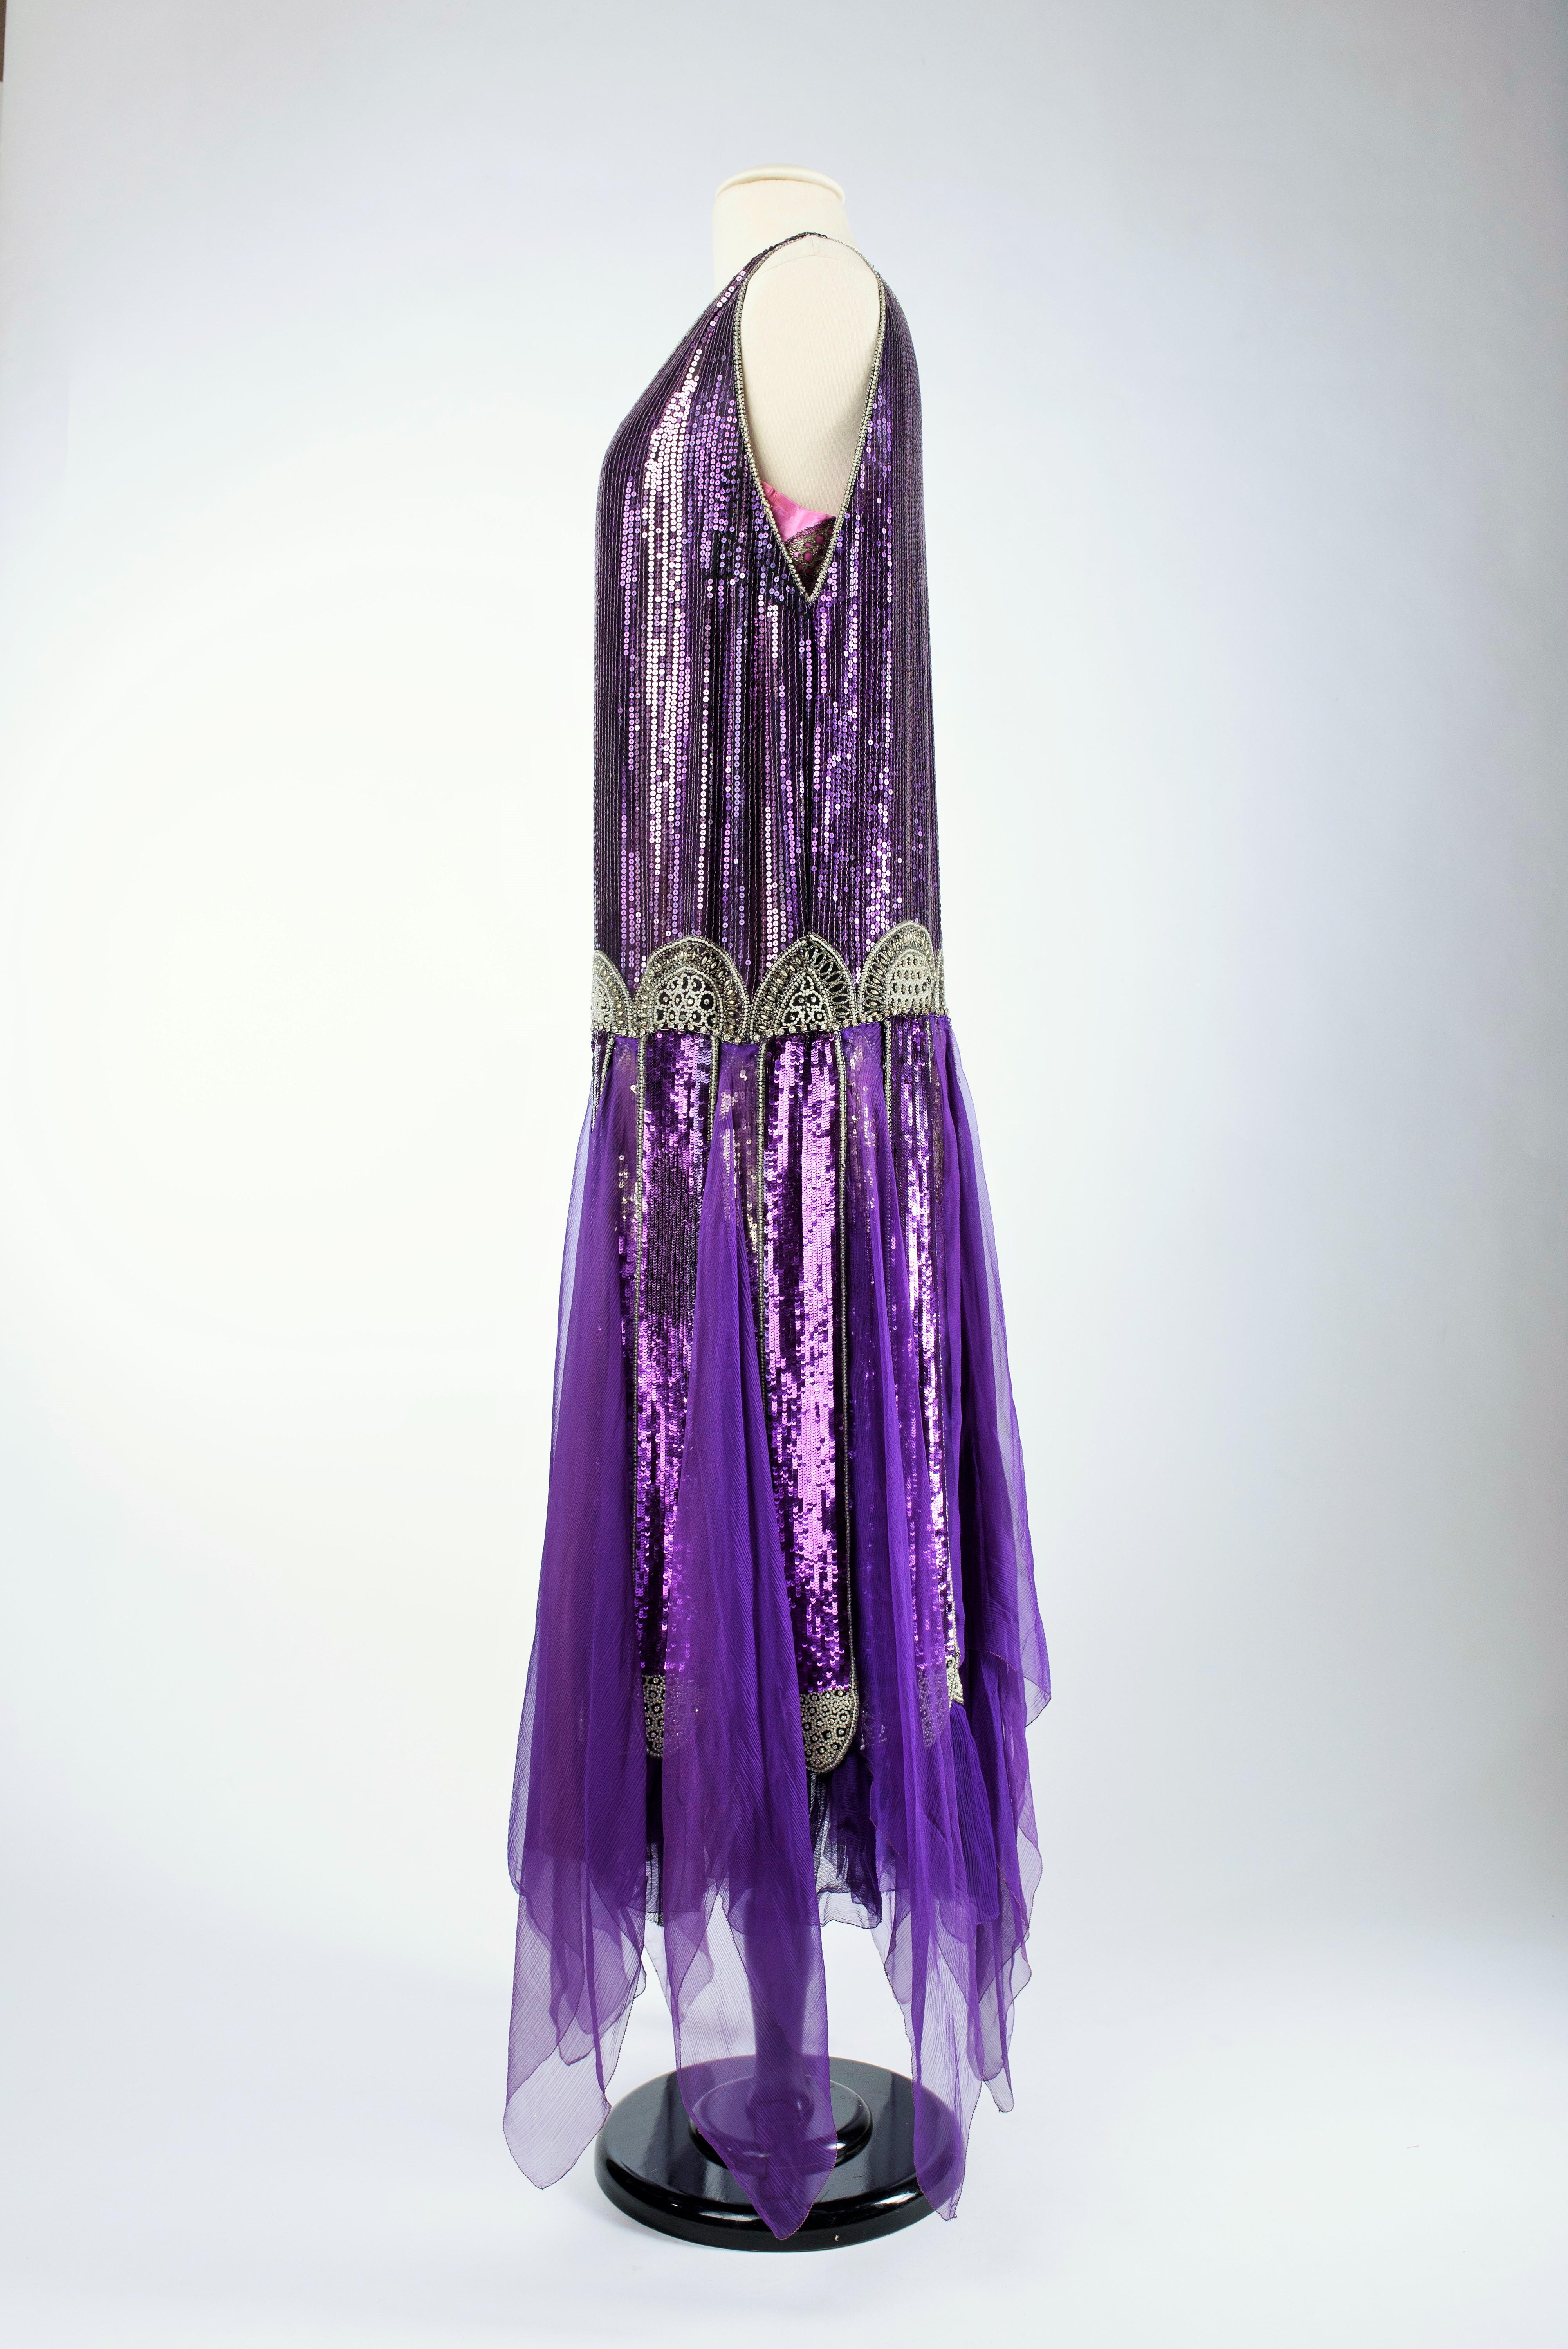 A Paul Poiret Ball Gown in Sequined Silk Crepe and Satin - France Circa 1925 For Sale 6